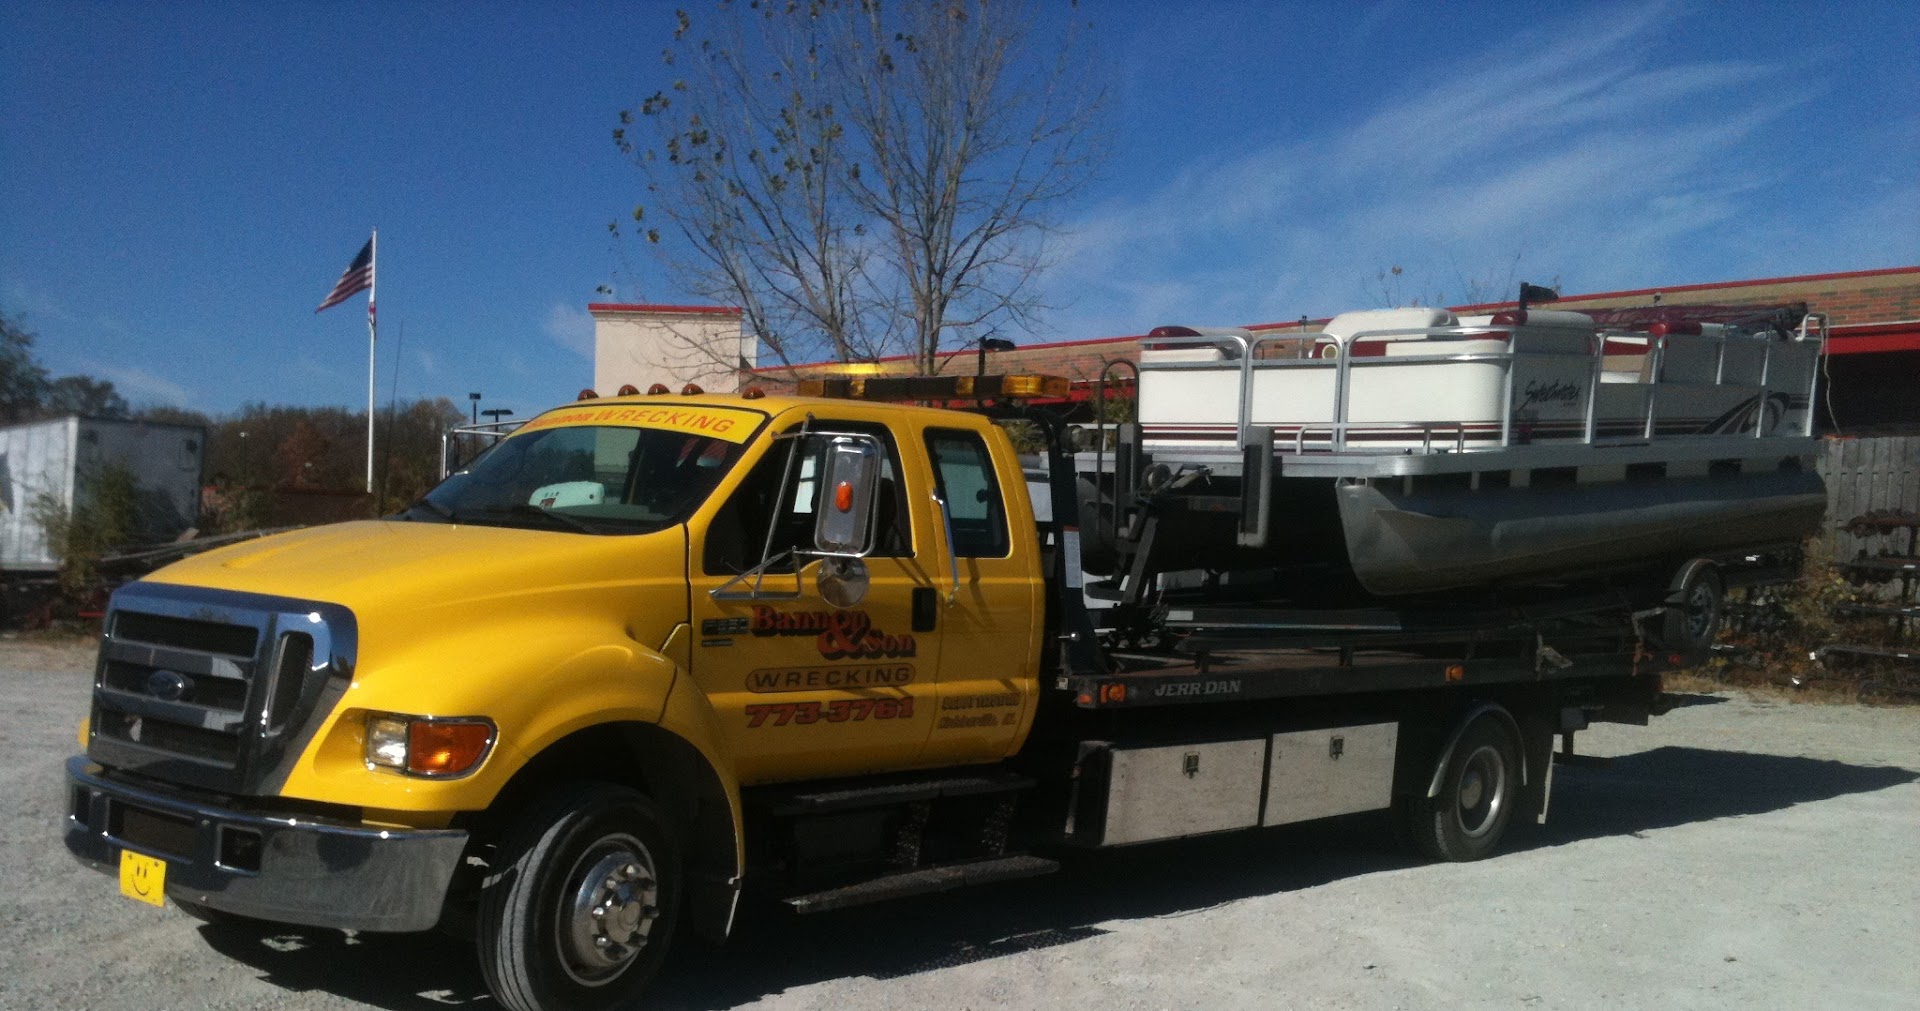 Towing service In Noblesville IN 